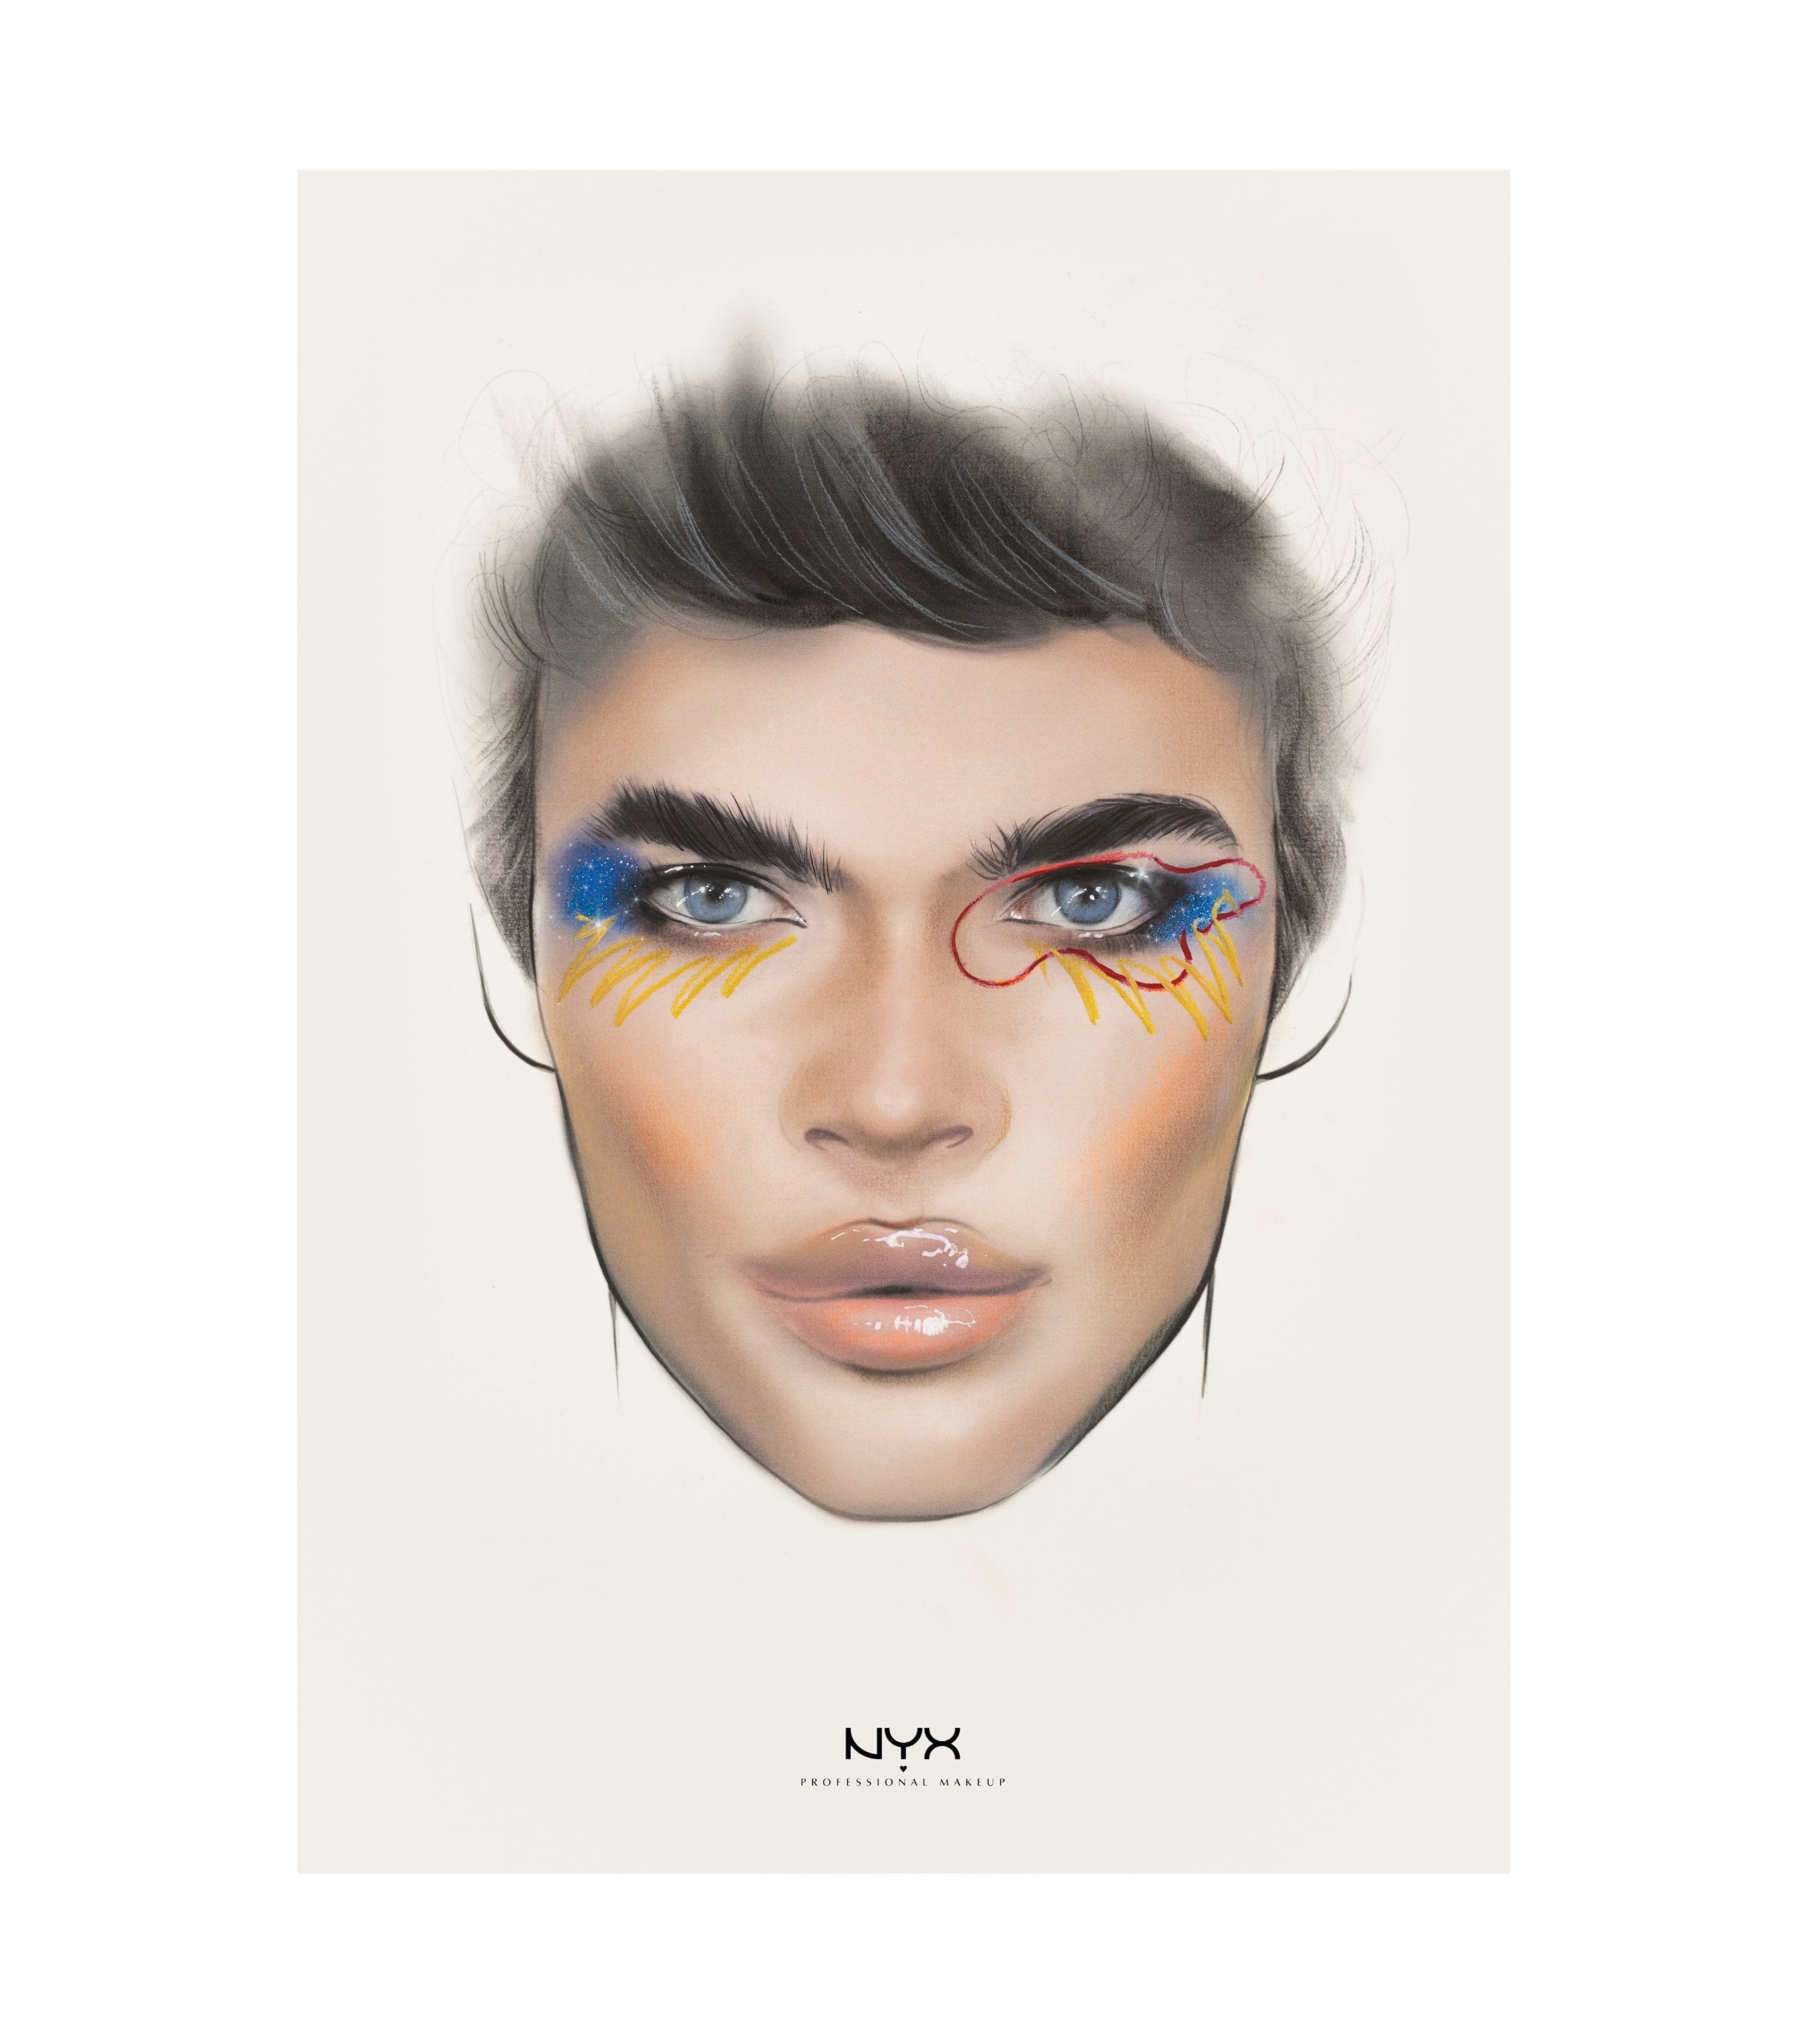 page of the Digital version of the face chart book by liza kondrevich  showing a male face chart  with graphic eye liner